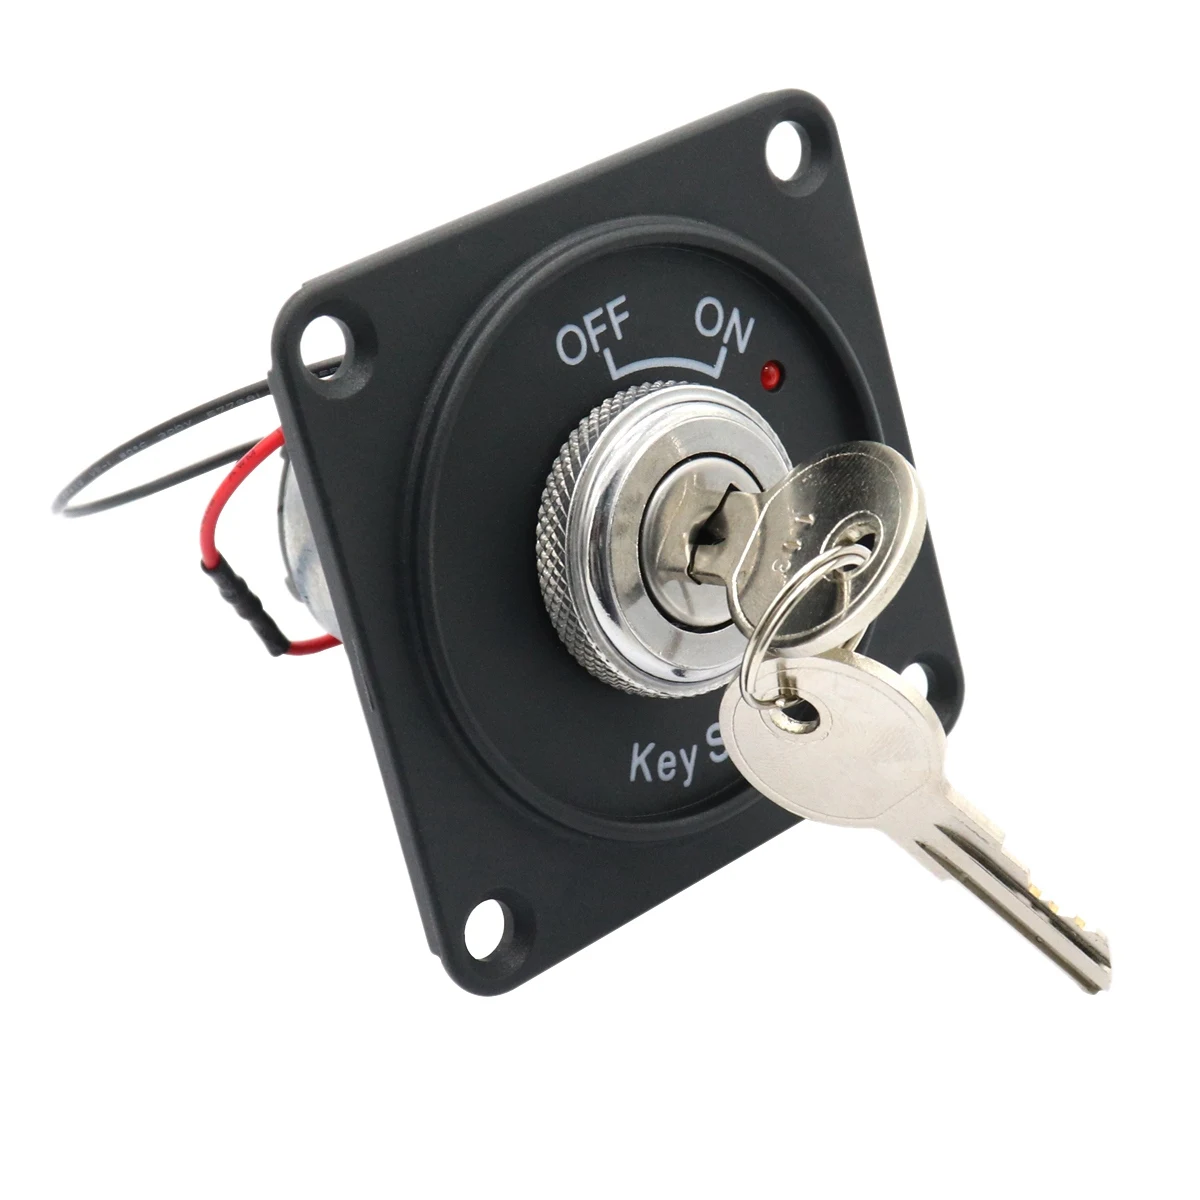 

Universal 12V Car Boat Motorcycle Ignition Starter Key Ignition Switch Panel 2Position With 2 Keys